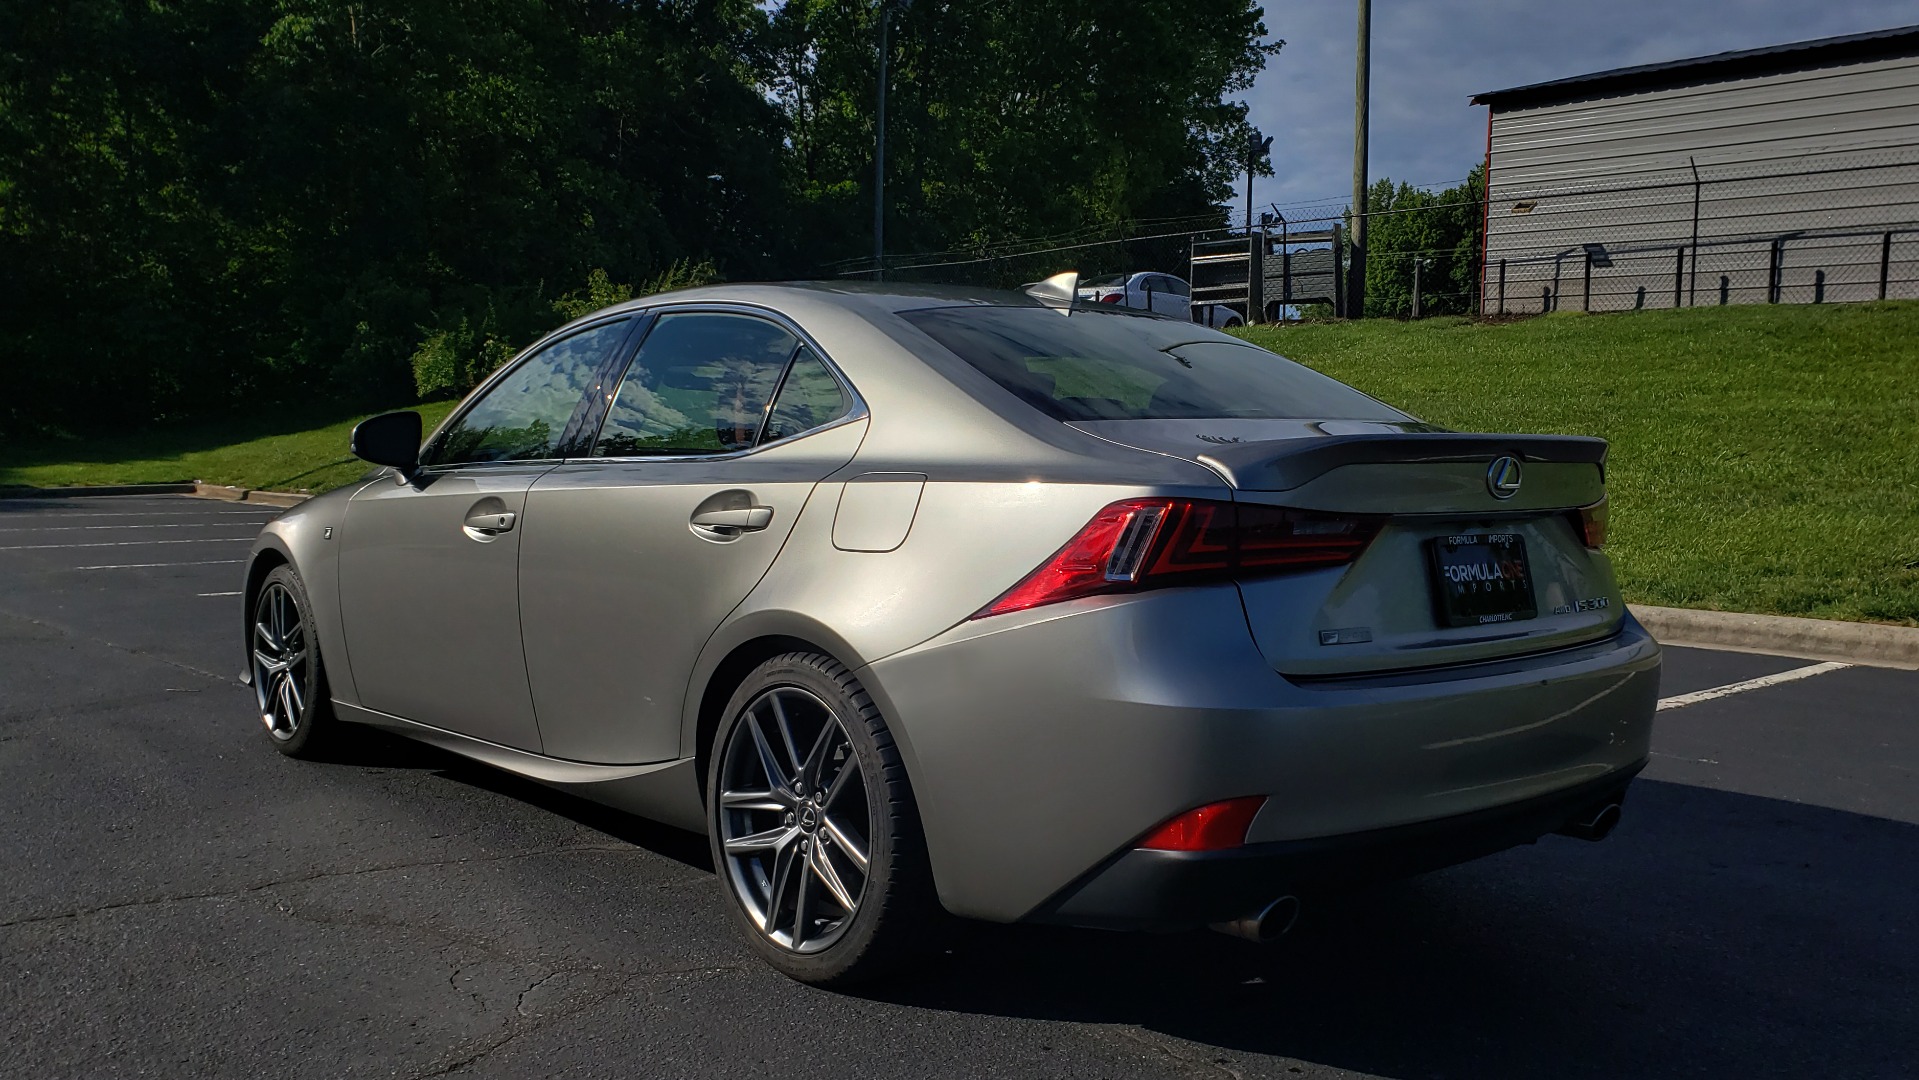 Used 2016 Lexus IS 300 F-SPORT / SUNROOF / BSM / VENTILATED SEATS / REARVIEW for sale Sold at Formula Imports in Charlotte NC 28227 3